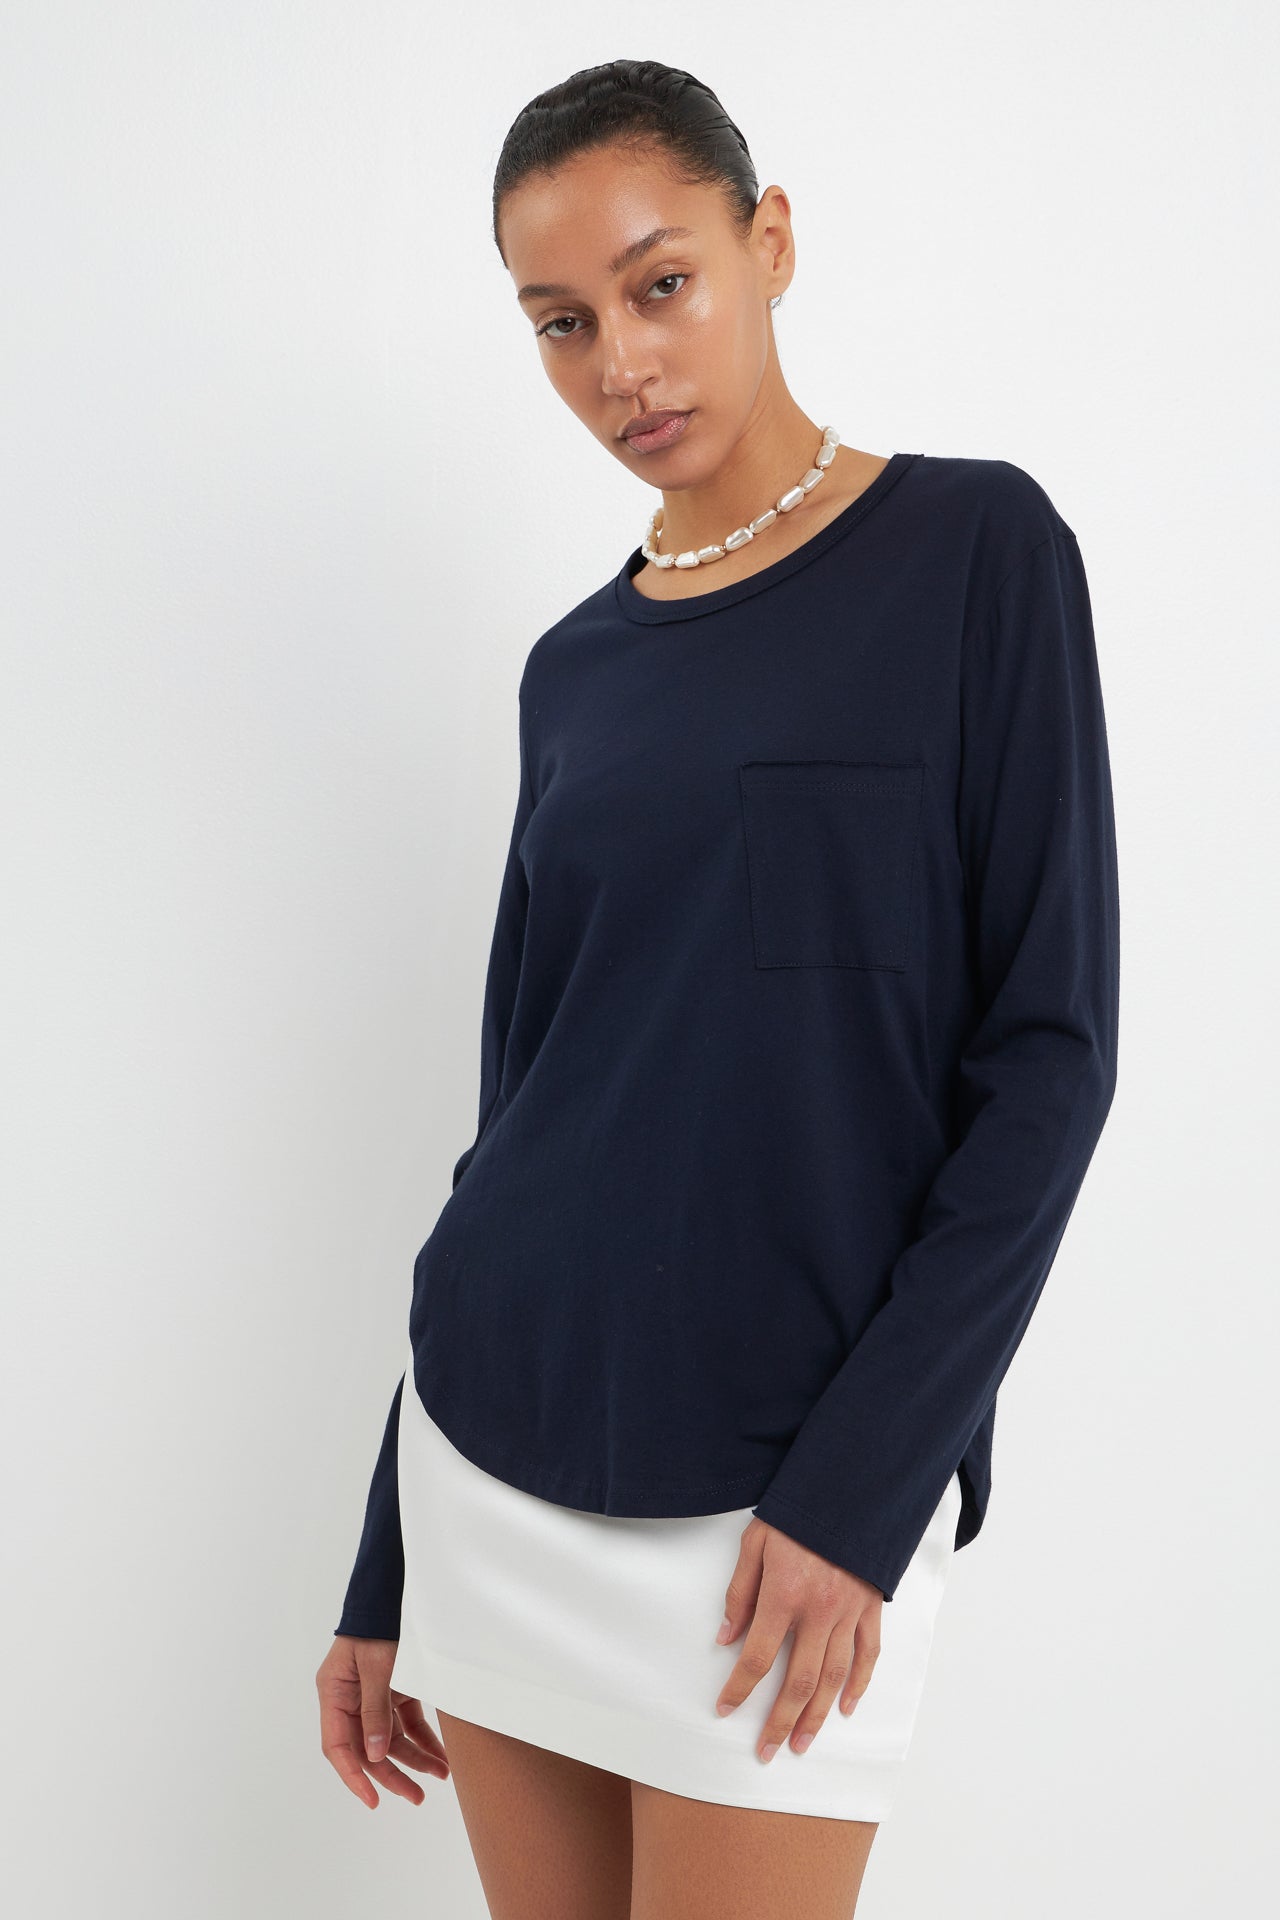 GREY LAB - Classic Round Neck Long Sleeve - T-SHIRTS available at Objectrare